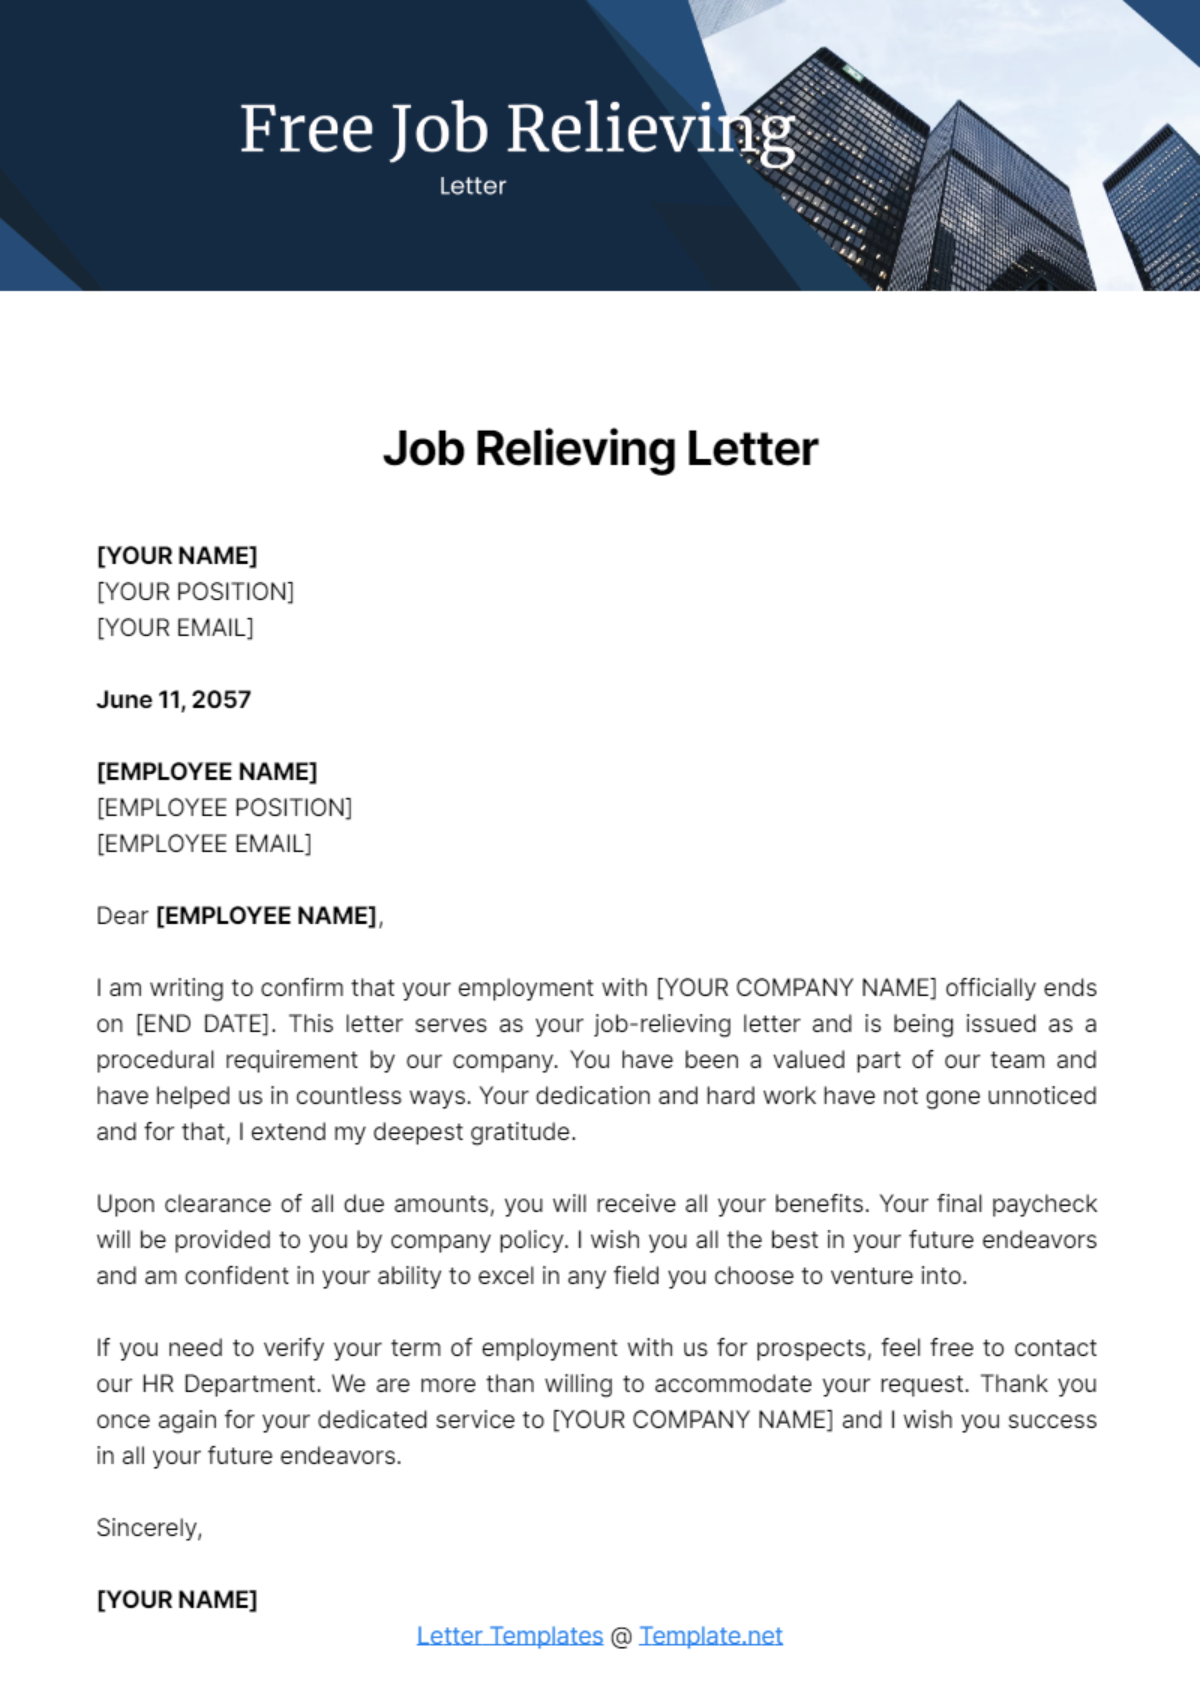 Job Relieving Letter Template